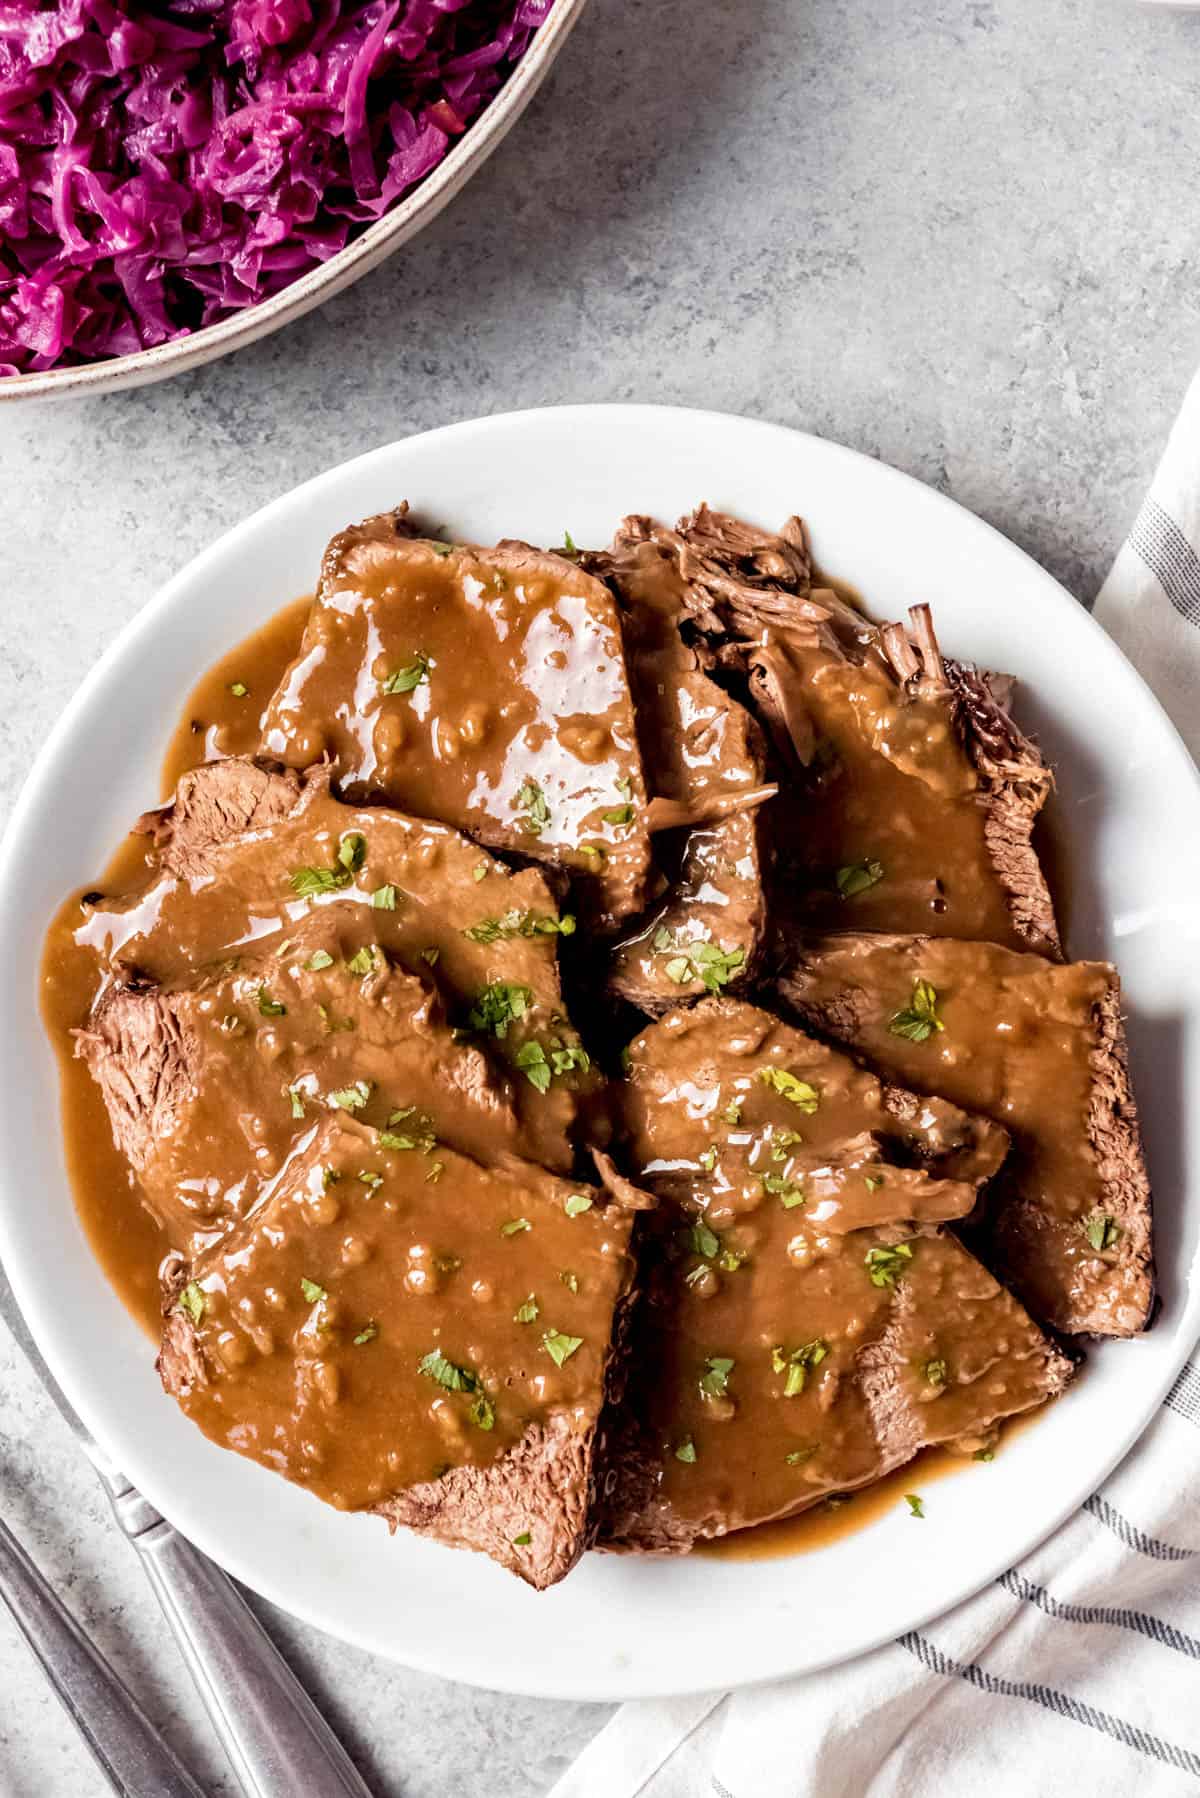 An image of German sauerbraten sliced on a plate with gravy on top.